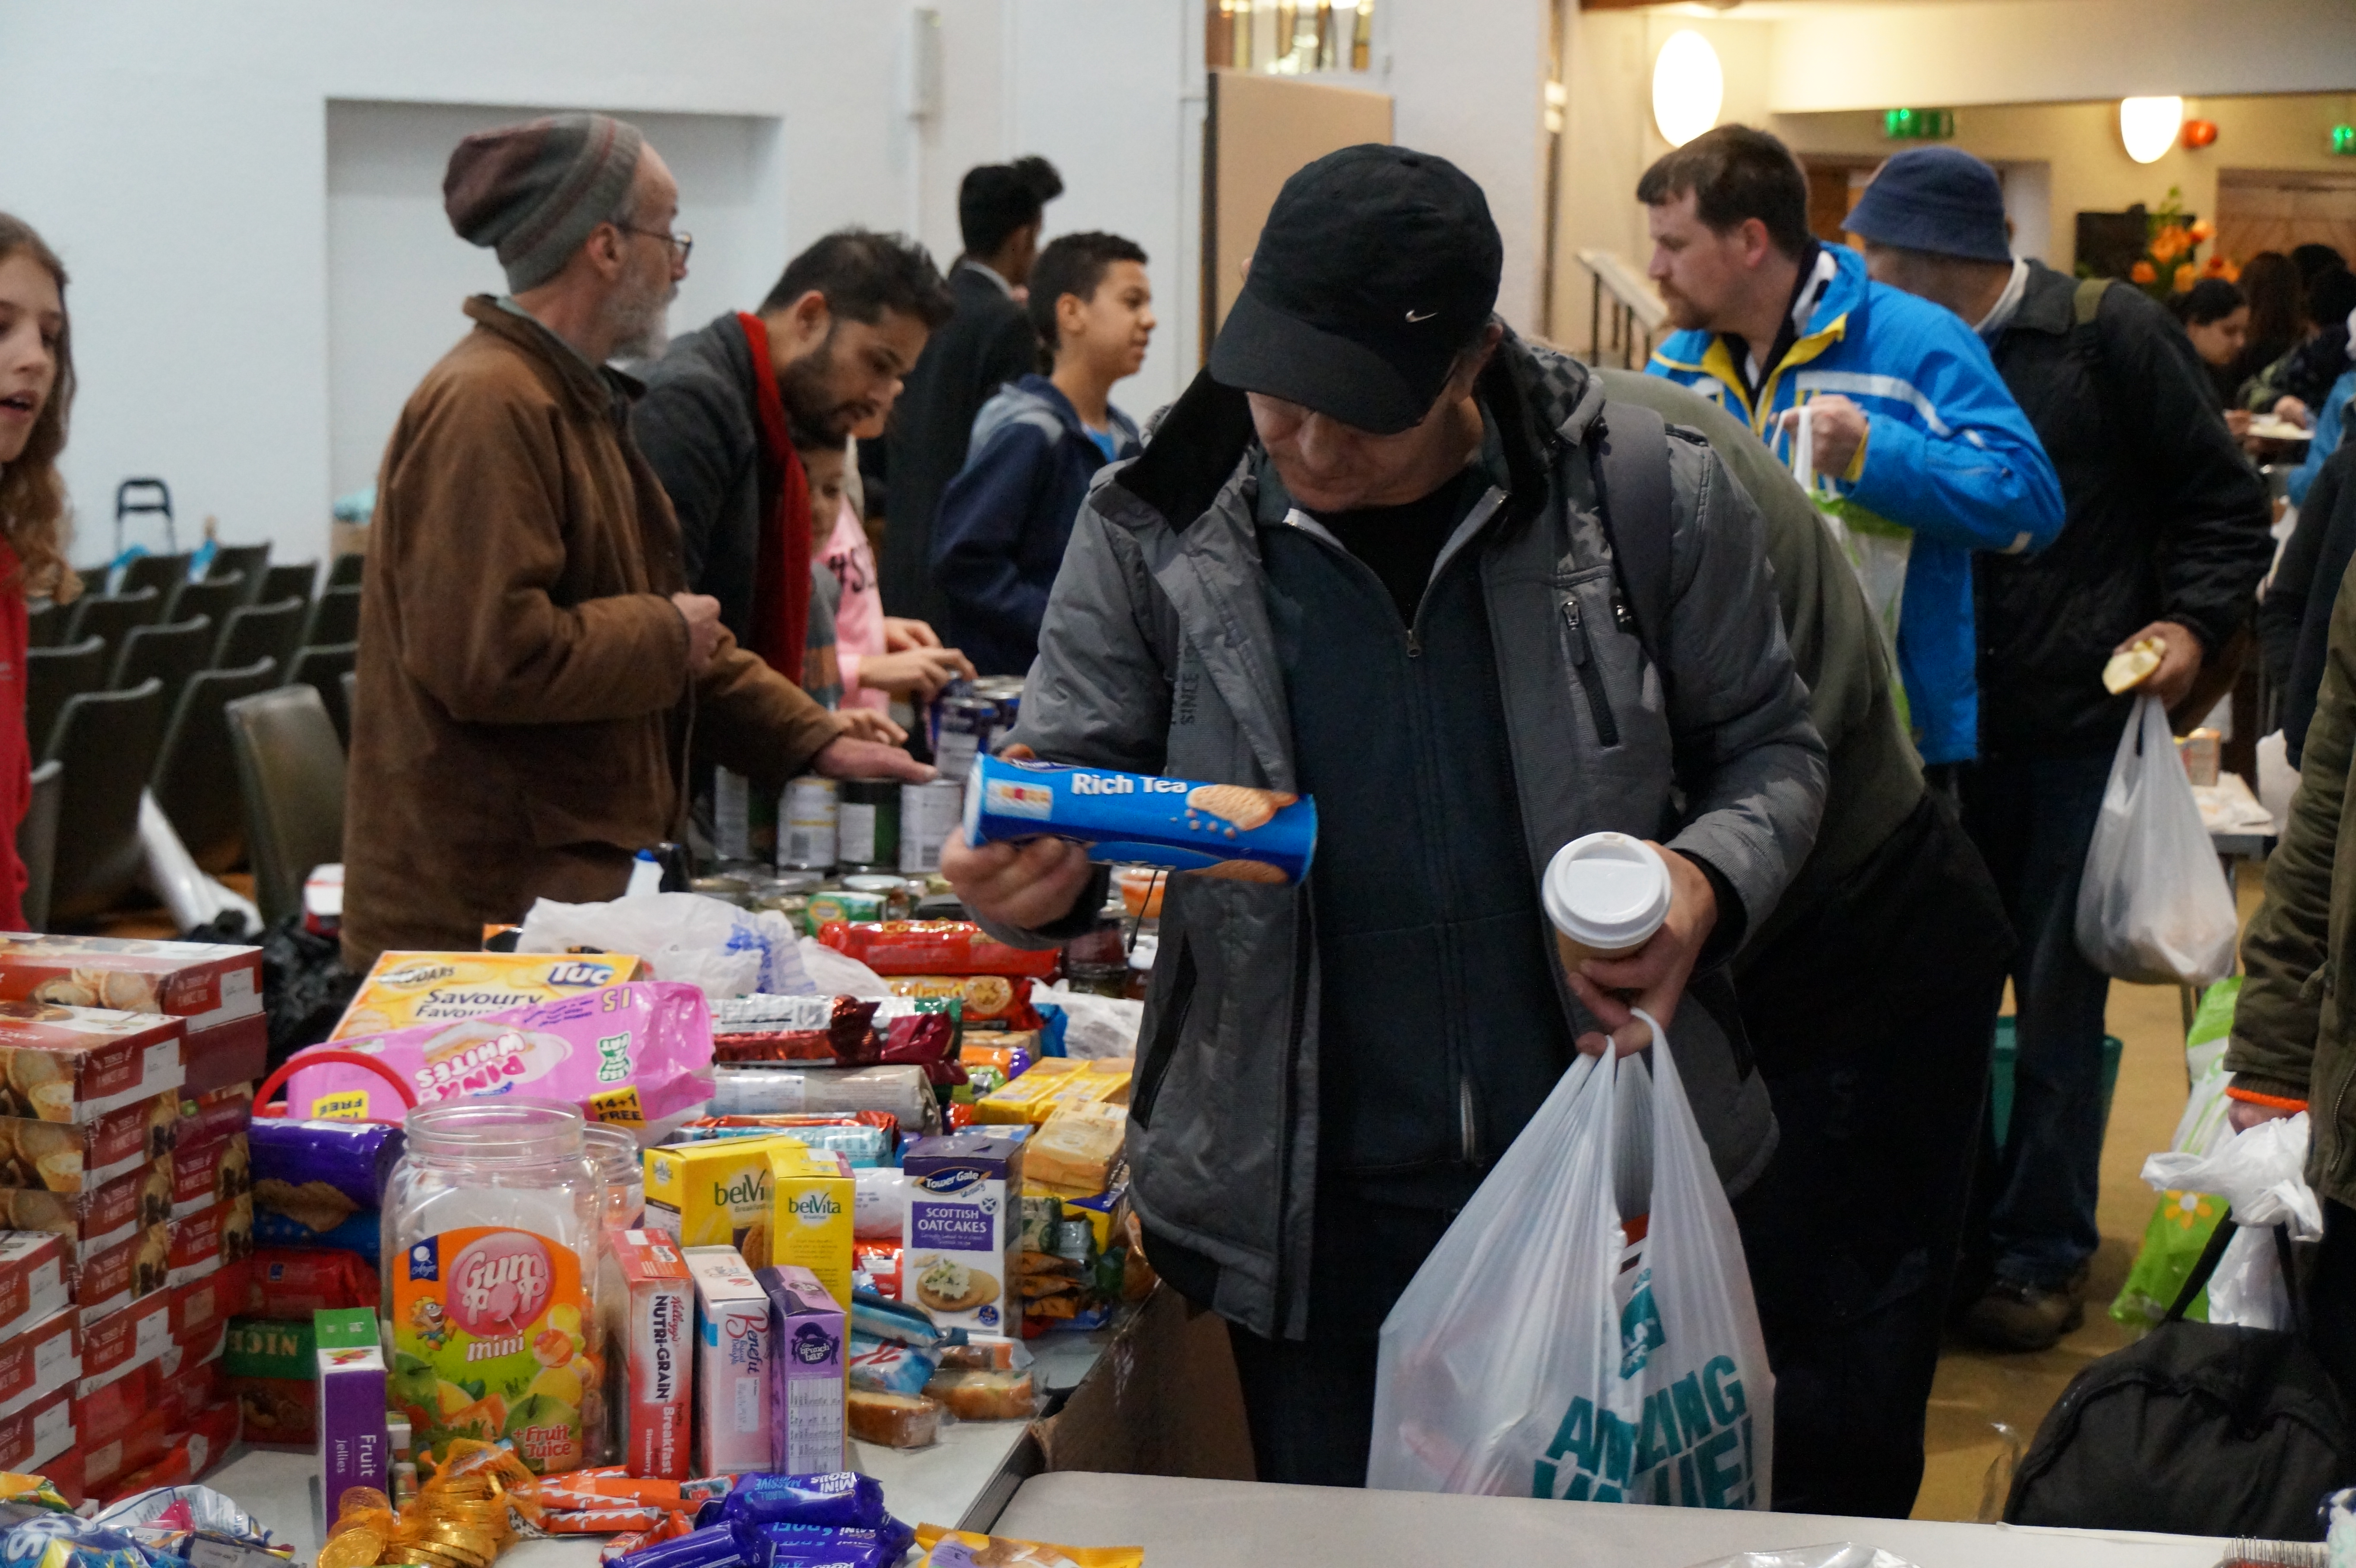 The Birmingham Food Drive is held at Carrs Lane Church (Photograph: Birmingham Food Drive)